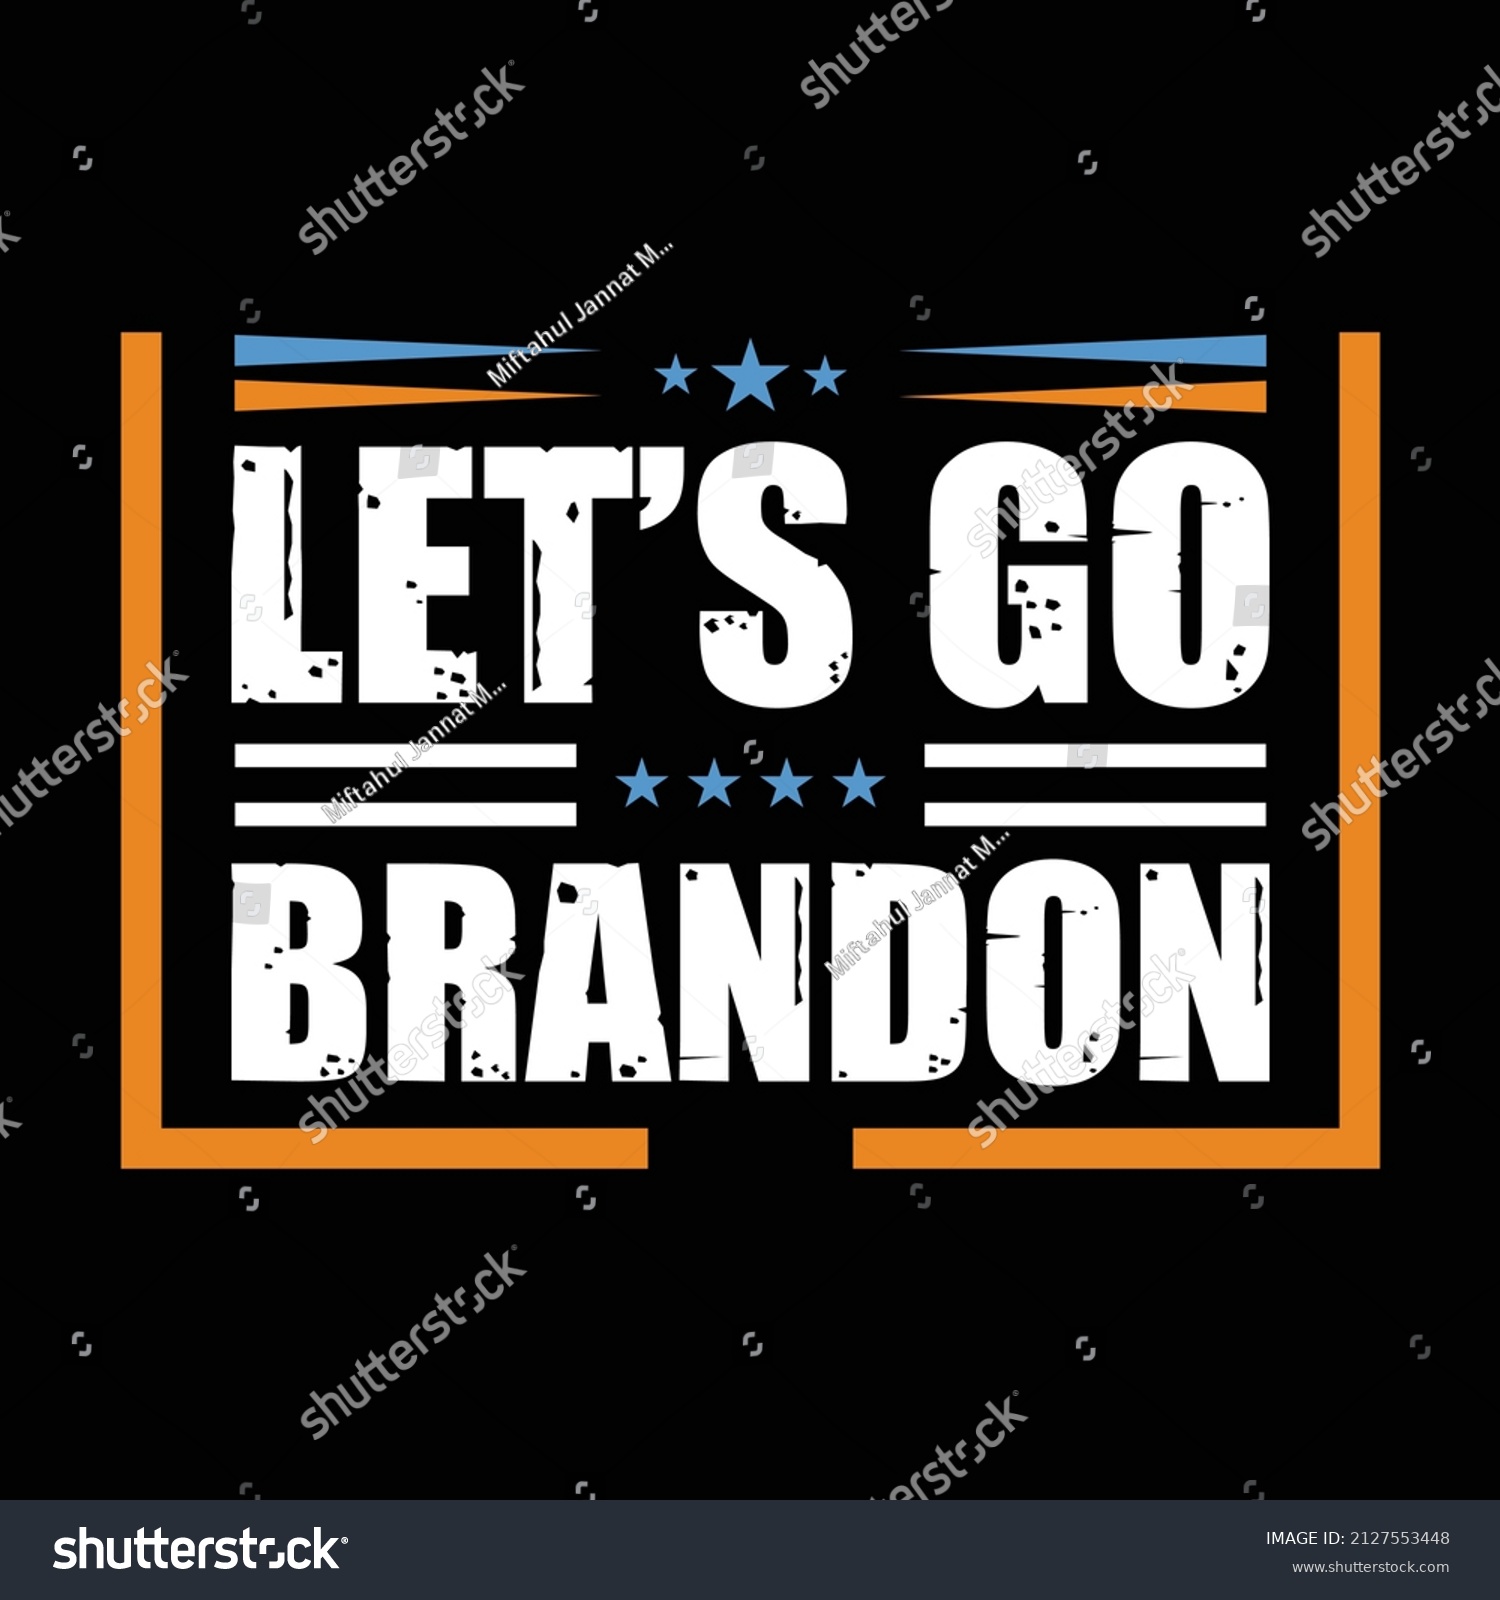 SVG of LET'S GO BRANDON is a typography and brand name t- shirt design.It is a wonderfull and eye-catching t-shirt design. svg